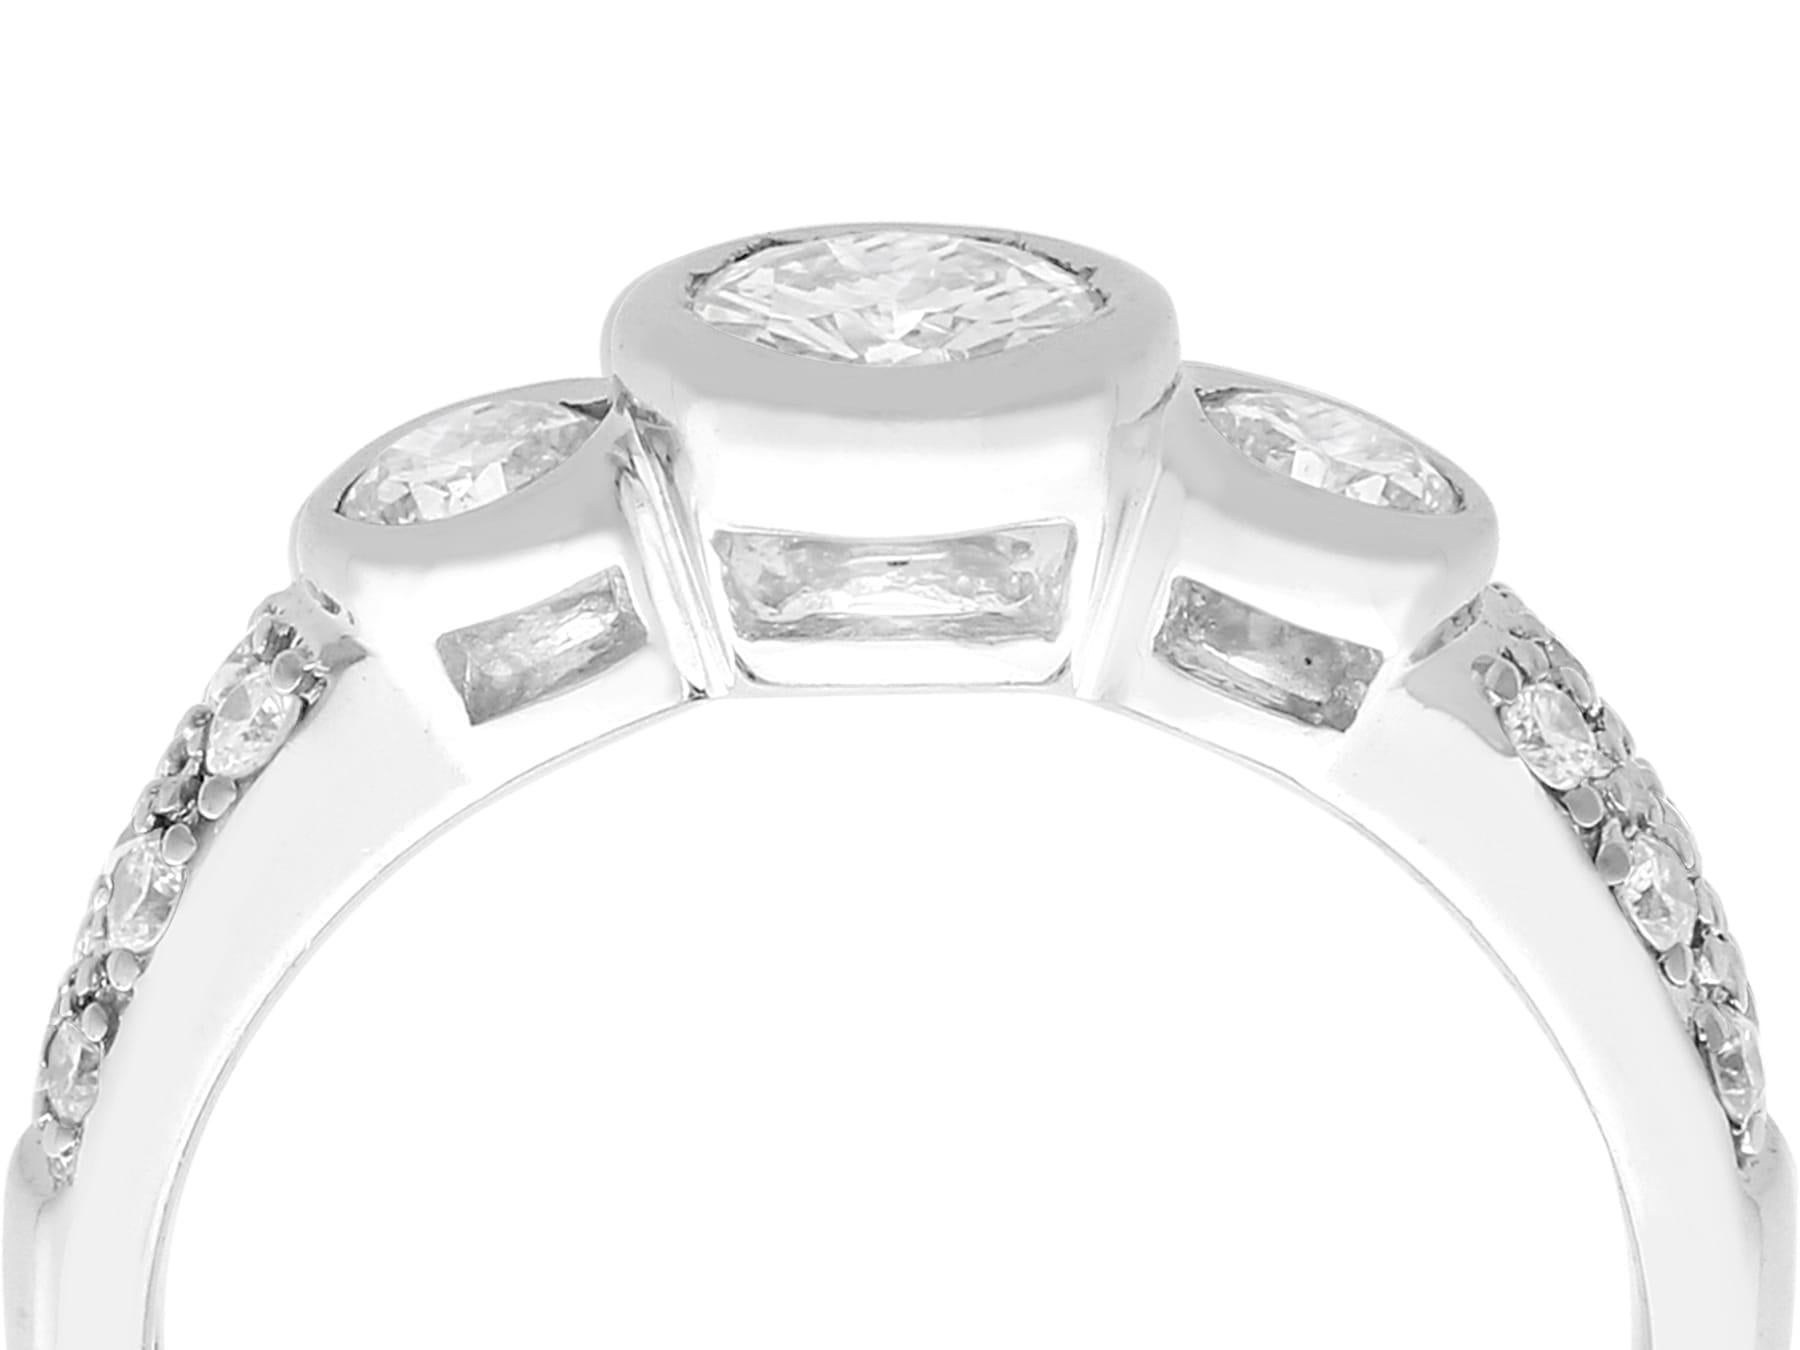 A fine vintage 0.95 carat diamond 18 karat white gold three stone/trilogy ring; part of our diverse diamond jewelry/jewelry collection.

This fine vintage diamond ring has been crafted in 18k white gold.

The feature 0.36Ct bezel set modern